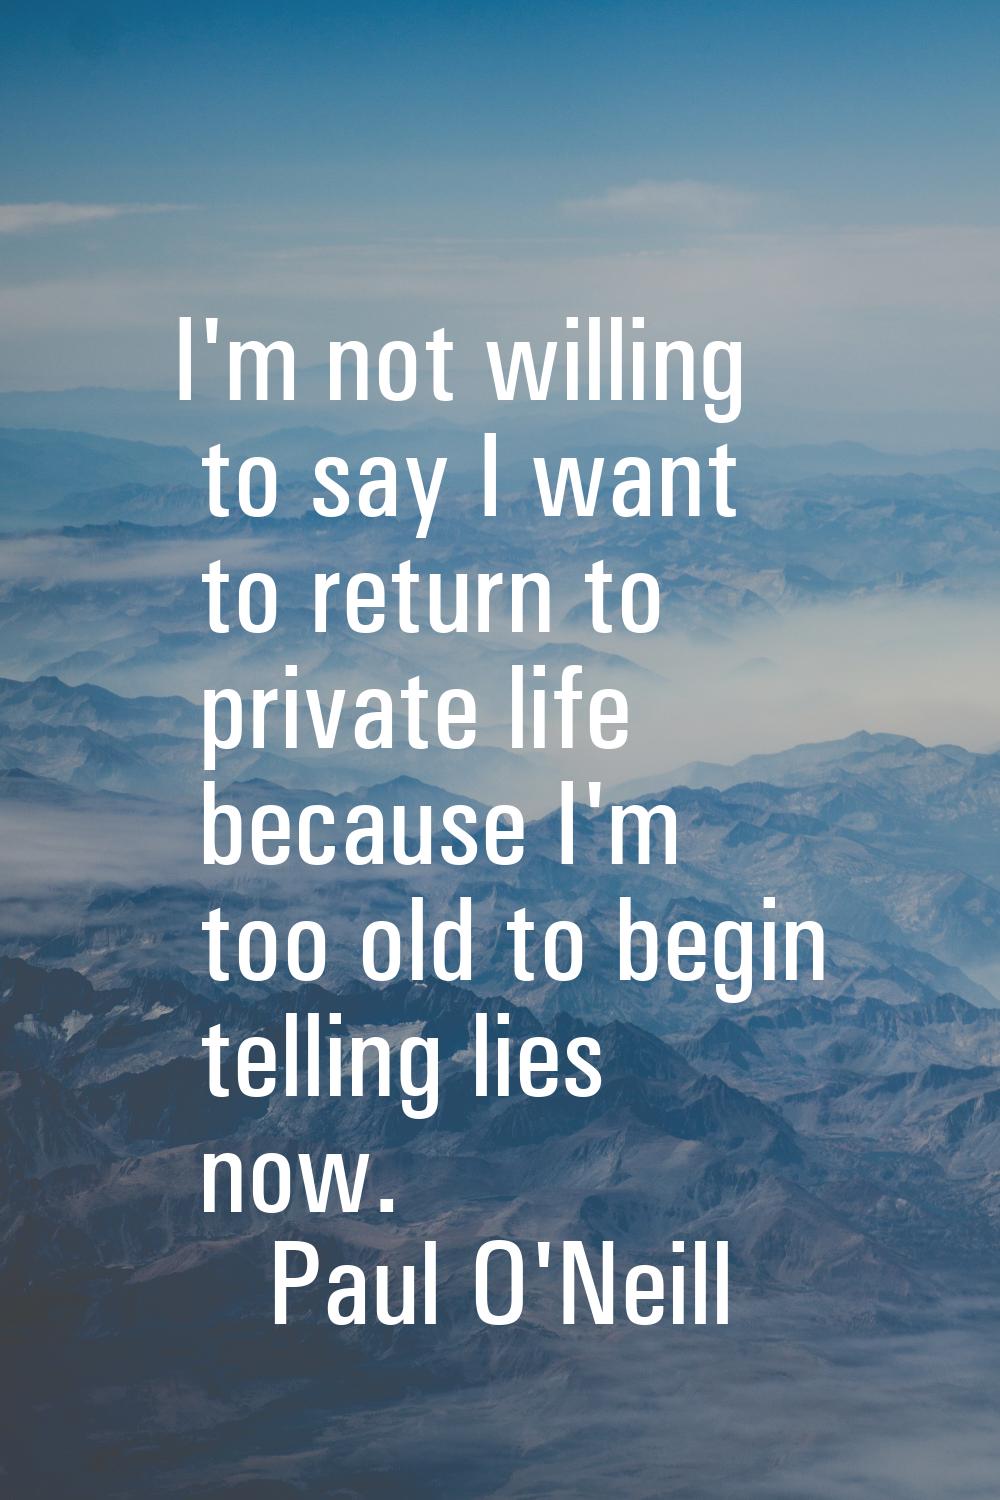 I'm not willing to say I want to return to private life because I'm too old to begin telling lies n